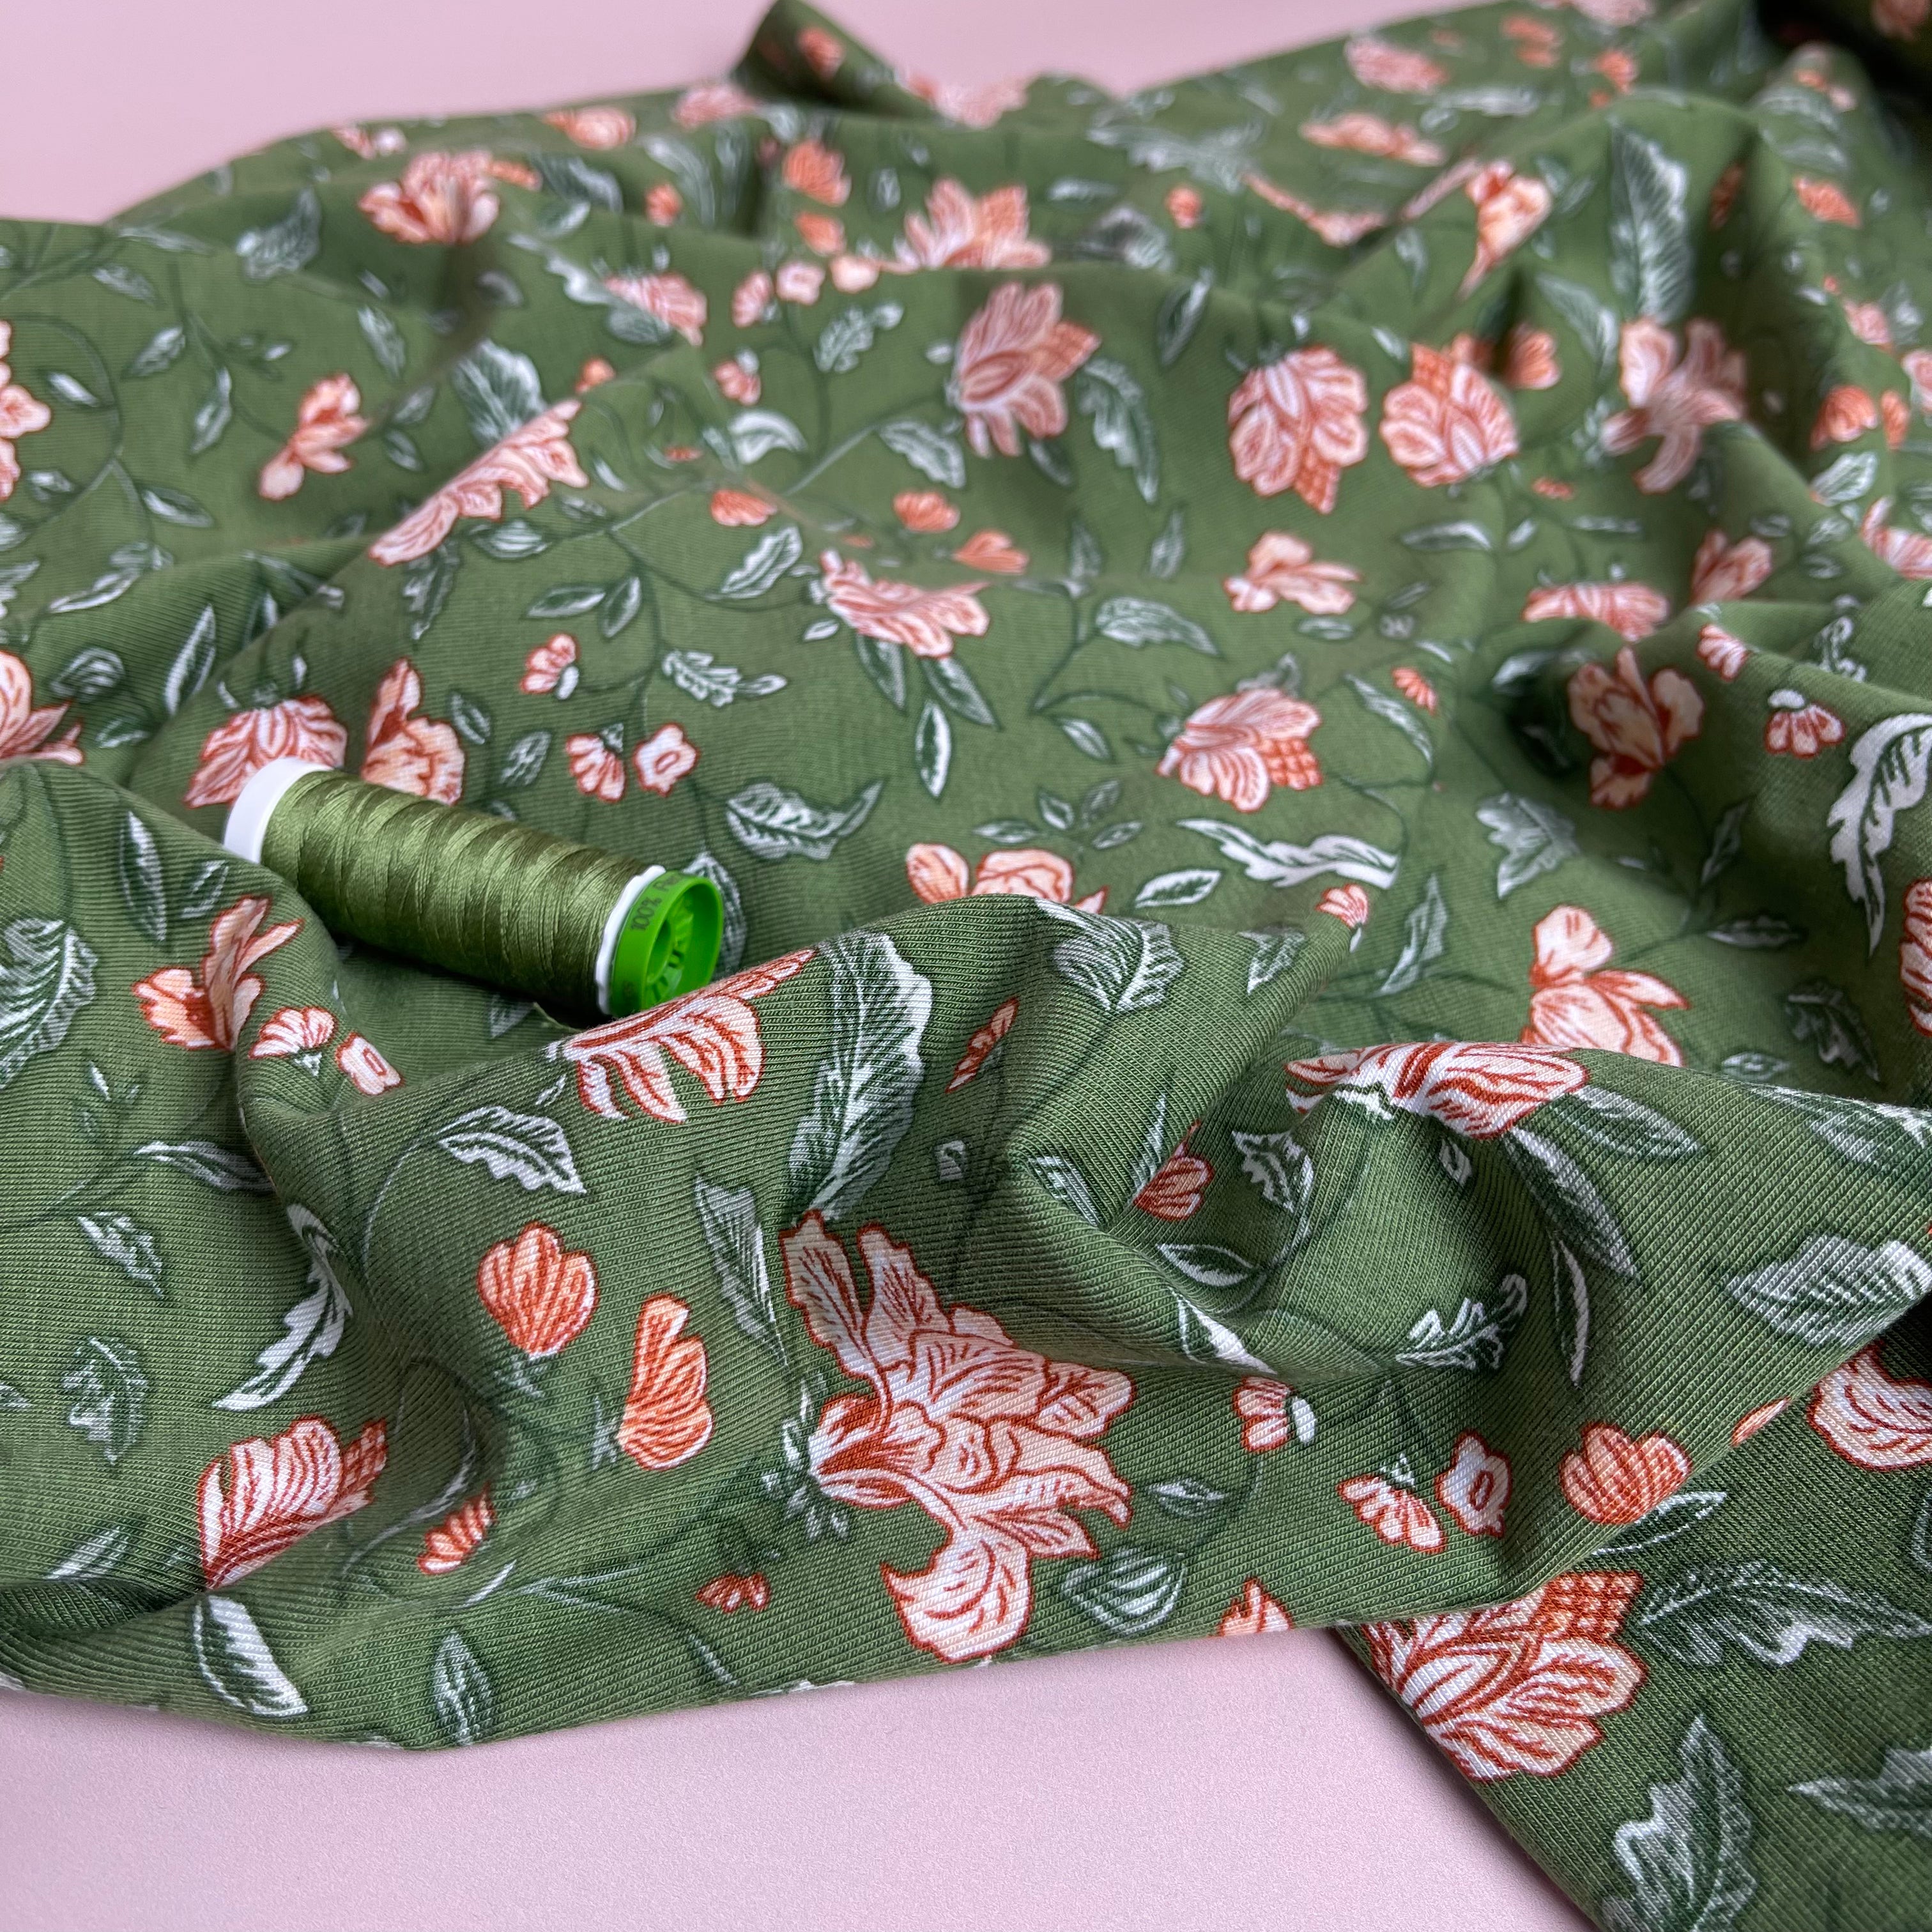 Magnolia in Moss Green Bamboo Cotton Jersey